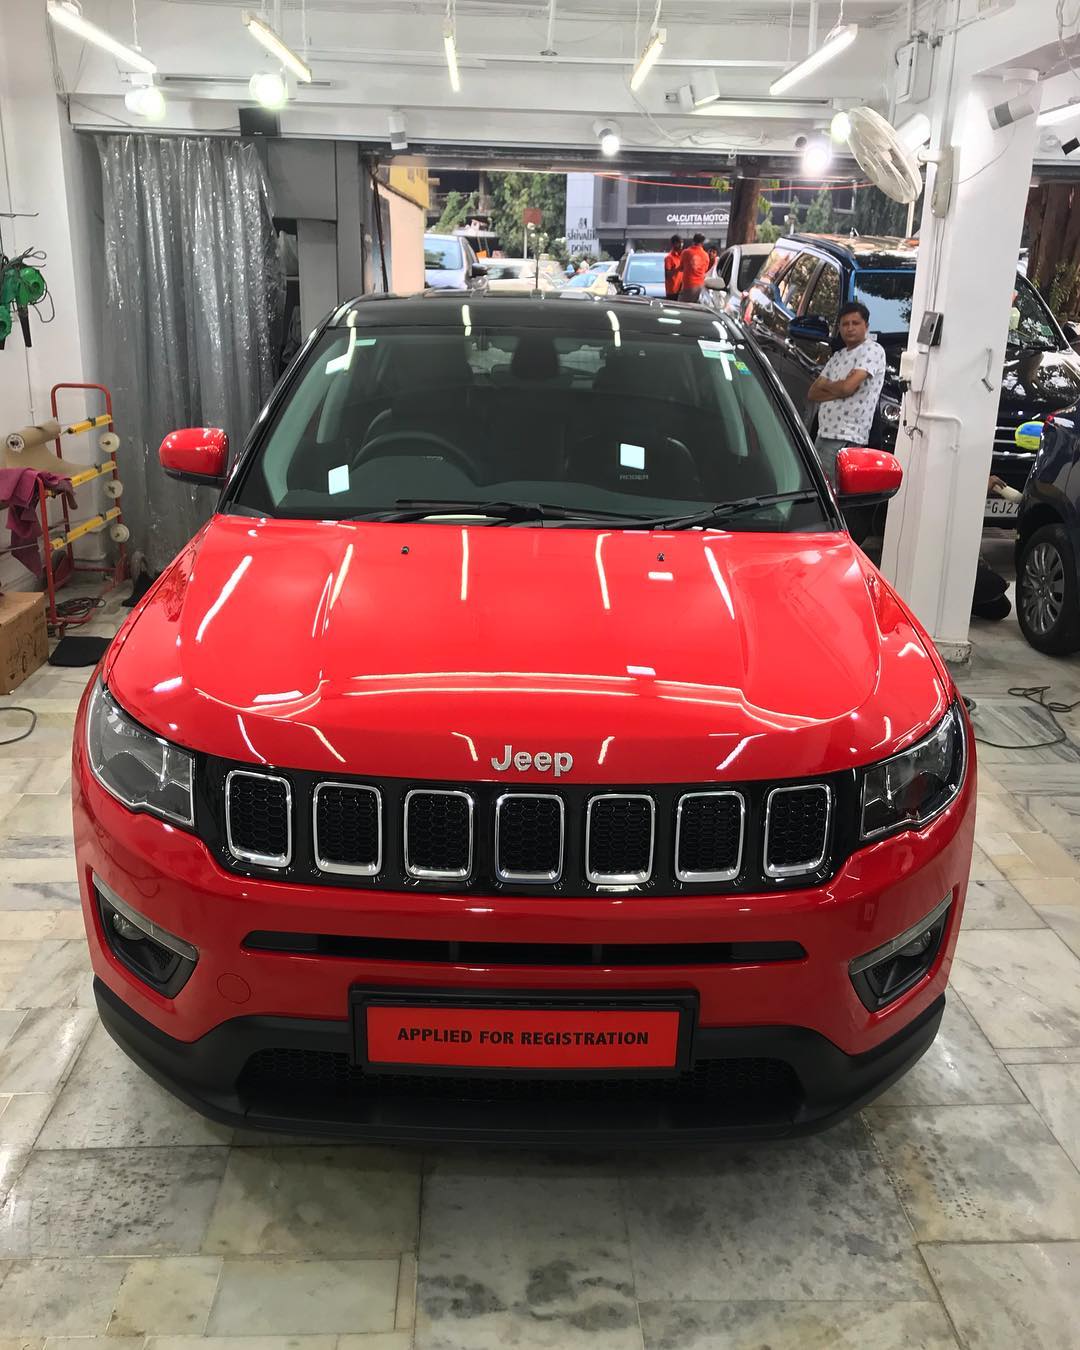 #JEEP #COMPASS #Red got the #Best #Ceramic Treatment at ‘’#Creative #Motors’’ #Ceramic Coat #Benefits: ♦Gives Additional Gloss/Shine ♦Protects Paint from Fading ♦No Ageing Effect ♦Removes Hairline Scratches & Water-spots ♦Water & Dust Repellent ♦Easy to Clean & Maintain ♦No need to Wax and Polish again ♦Scratch Resistant upto 9H Hardness ♦3 Year  Protection in 3 hours 
Call or Whatsapp : +91 99099 99135 
Follow us on instagram: www.instagram.com/creativemotors 
Add: 
Creative Motors Ahmedabad 
GF 1,2 Urvashi Complex, 
Nr. Calcutta Motors, Mithakhali Six Roads, Law Garden Road, Navrangpura, Ahmedabad  9909999135 
9909999135 
#creativemotors #bikes #bikers #Cars #carspa #microdetailing #ceramiccoatings #coatings  #glasscoatings #waterrepellant #scratchproof #minicooper #supercars #Rajkot #ahmedabad #Jeep #compass #qualityovereverything